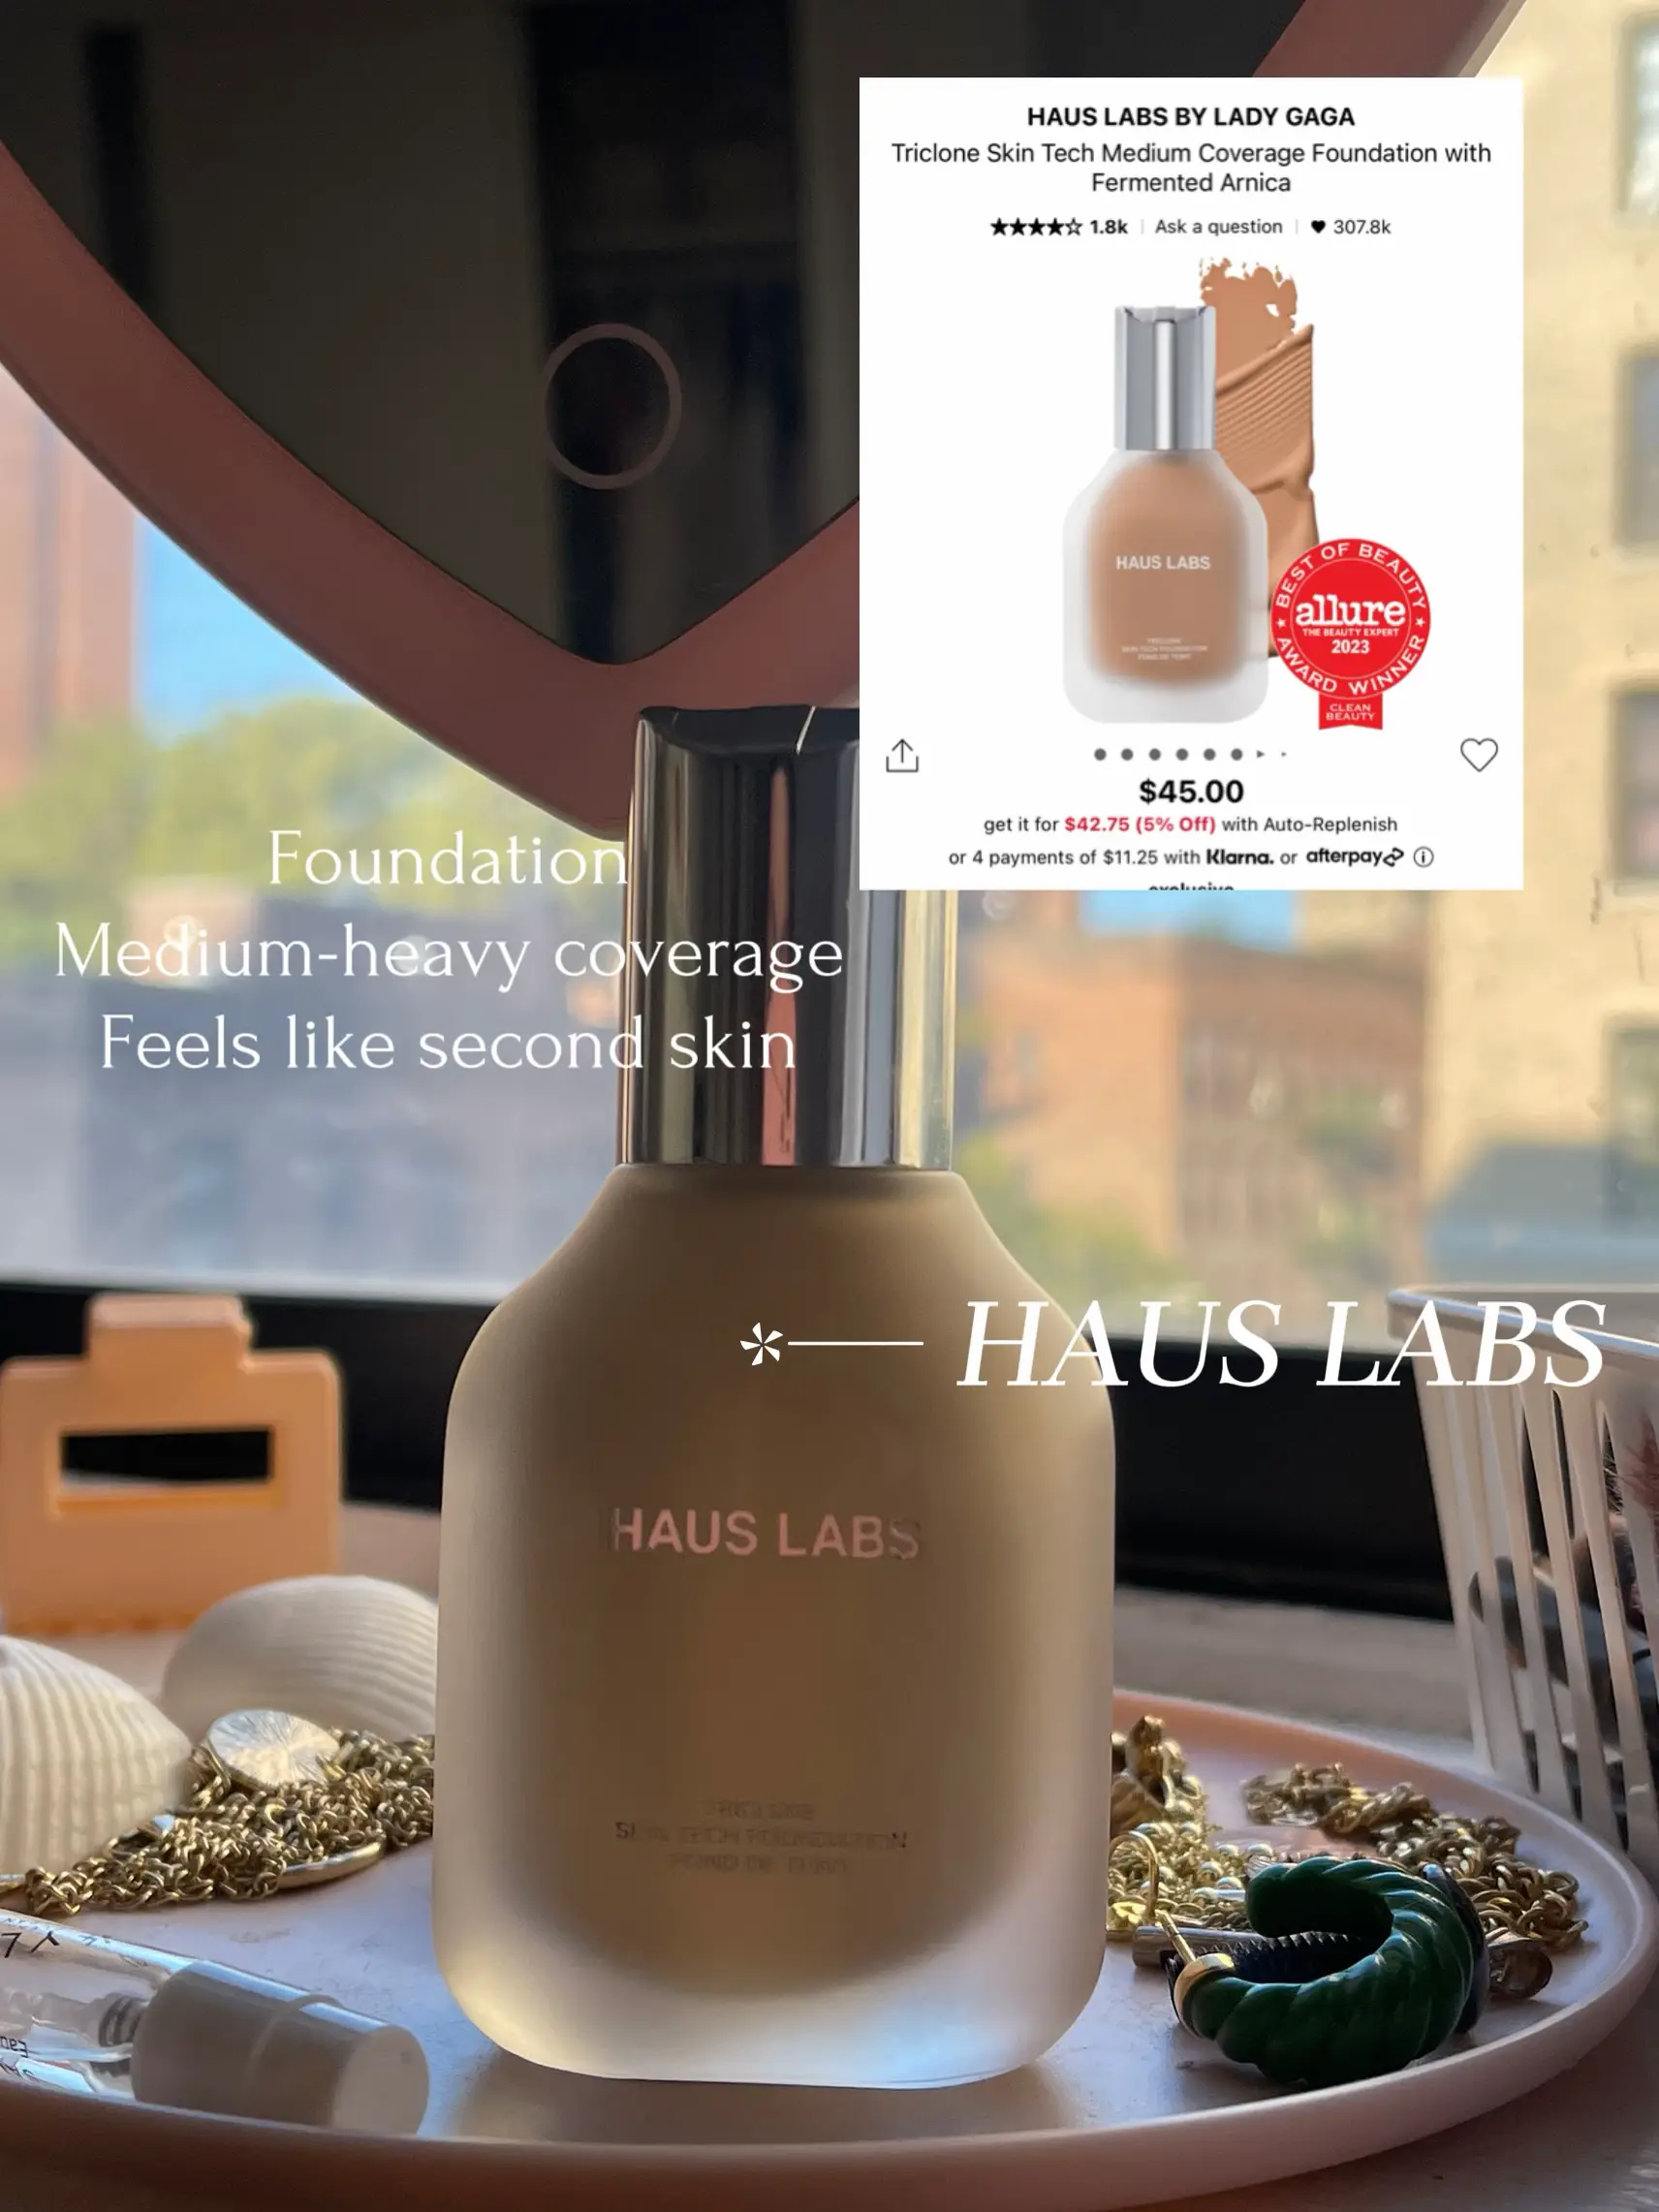 HAUS LABS BY LADY GAGA Triclone Skin Tech Medium Coverage Foundation with  Fermented Arnica